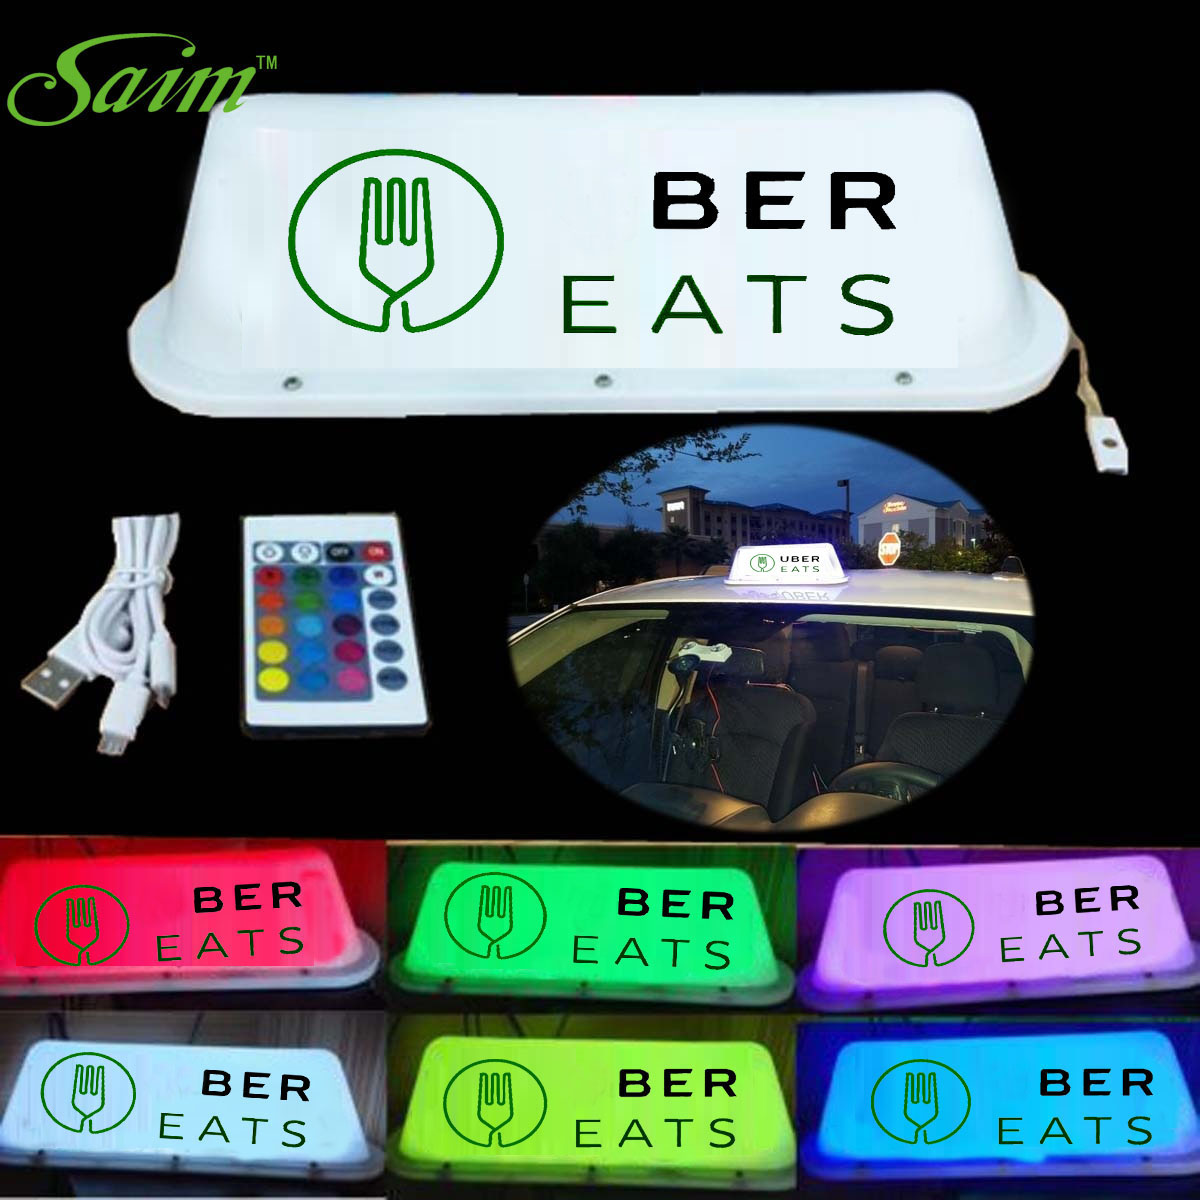 

UB EATS Sign Wireless Car Badges Taxi Cab Roof Top Topper Light Lamp Bright LED for drivers